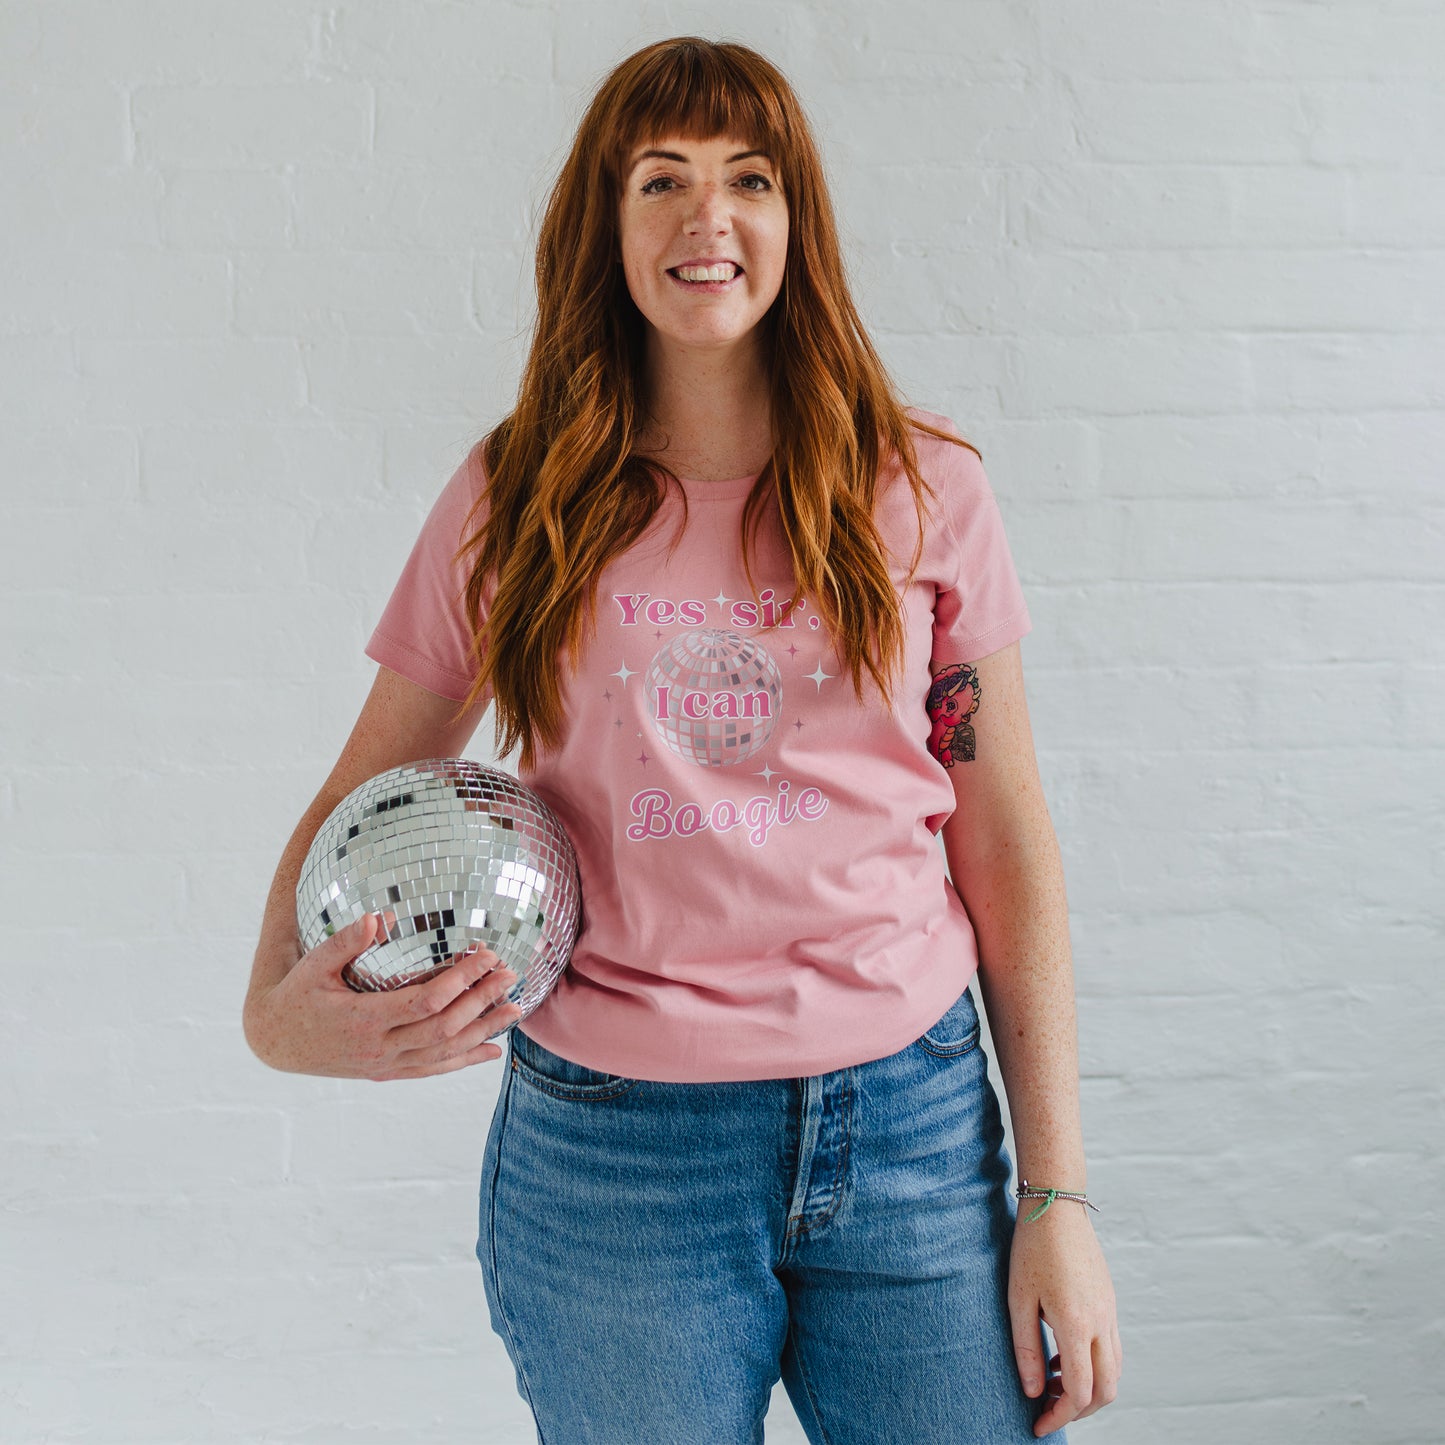 Ladies pink disco ball fitted t-shirt. Woman holding a silver disco ball, wears blue jeans and dusky pink round neck fitted tshirt. 70s disco music inspired womens pink graphic tshirt with silver tint mirrorball and sparkles. Slogan reads Yes sir I can Boogie in pink font with white outline